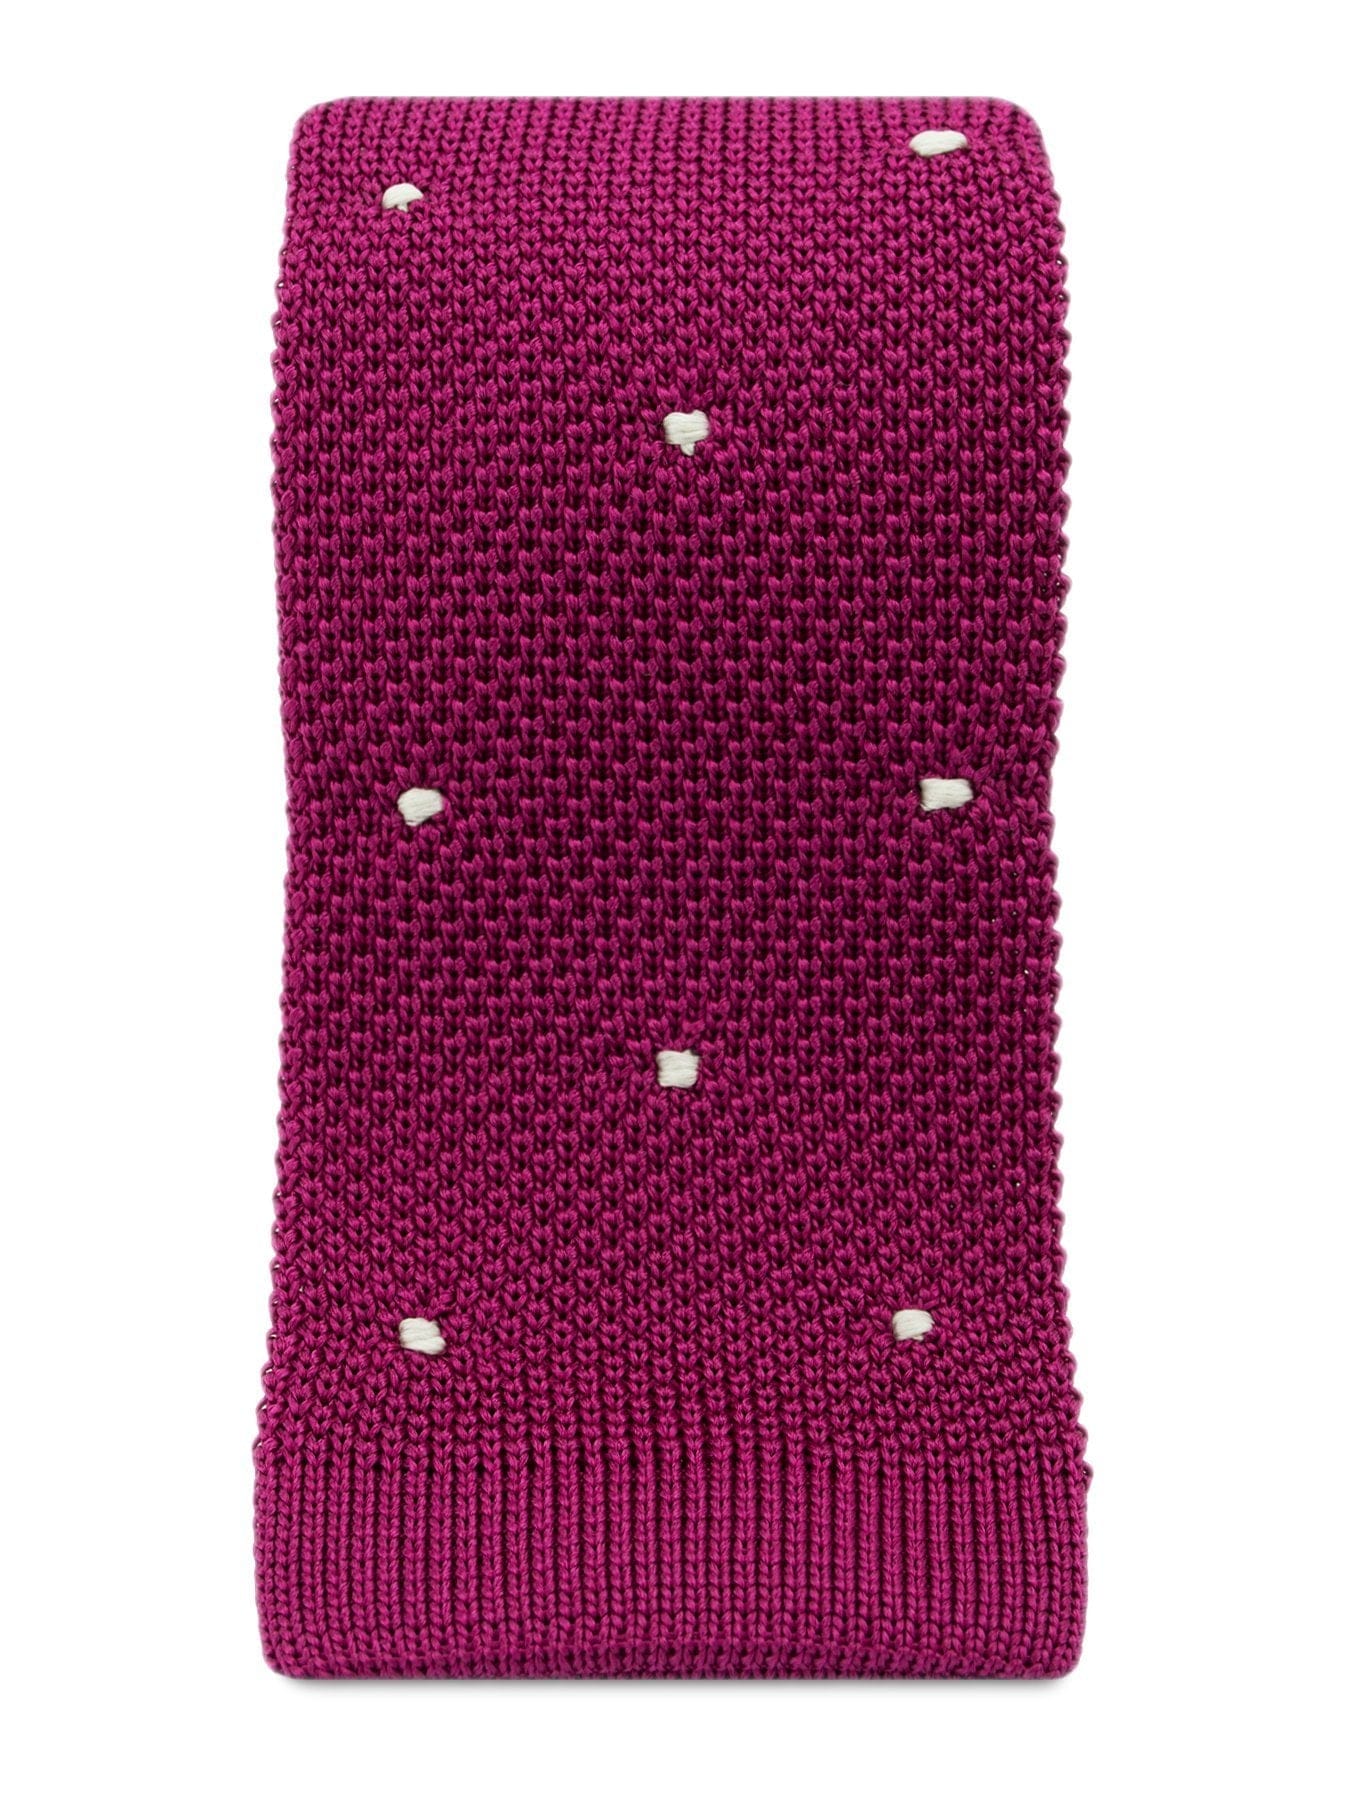 Cerise Knitted Silk Tie with White Spots